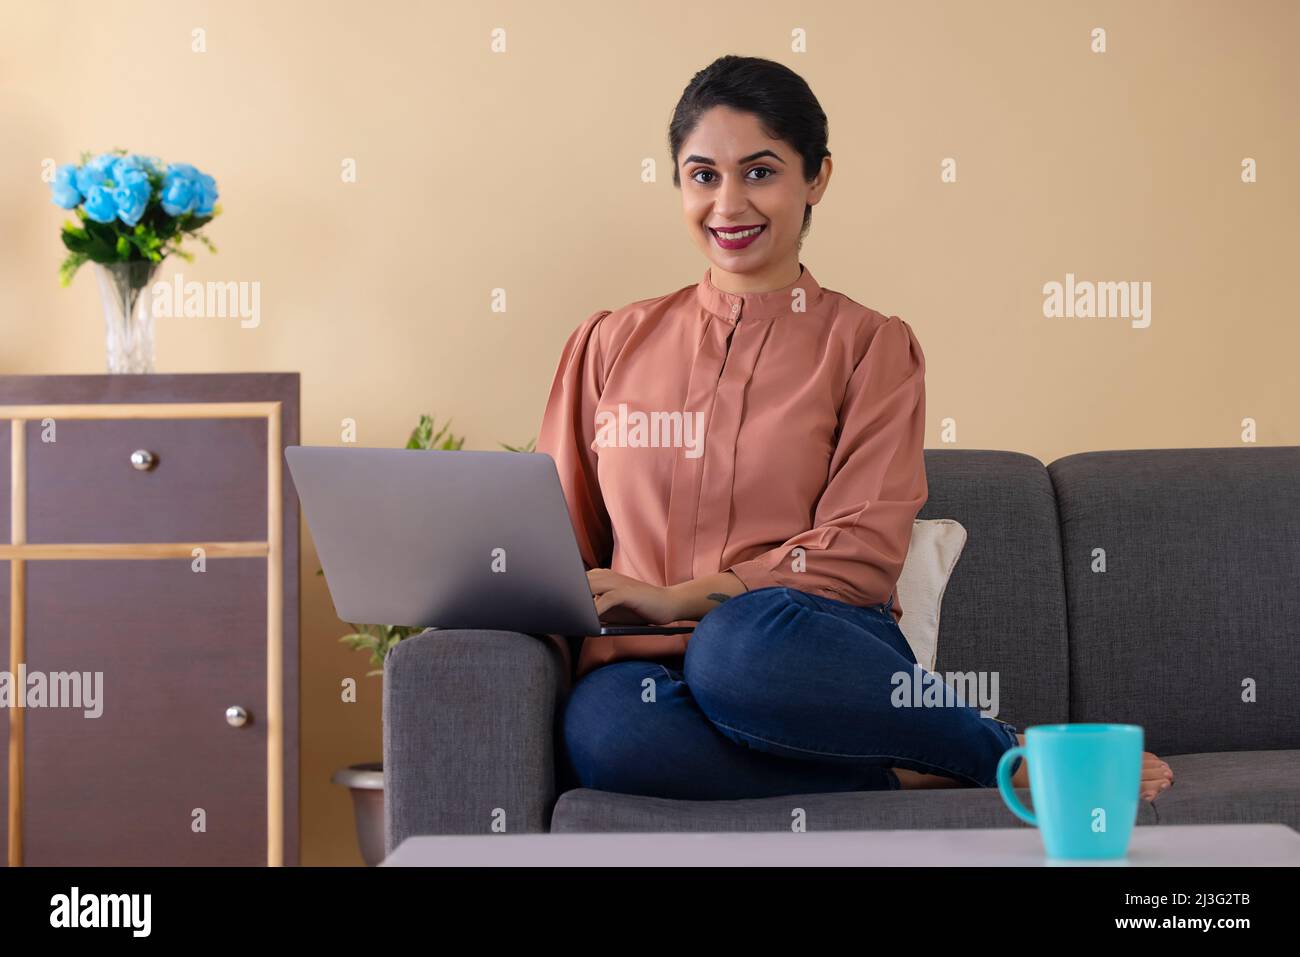 Happy Indian woman working from home using laptop Stock Photo